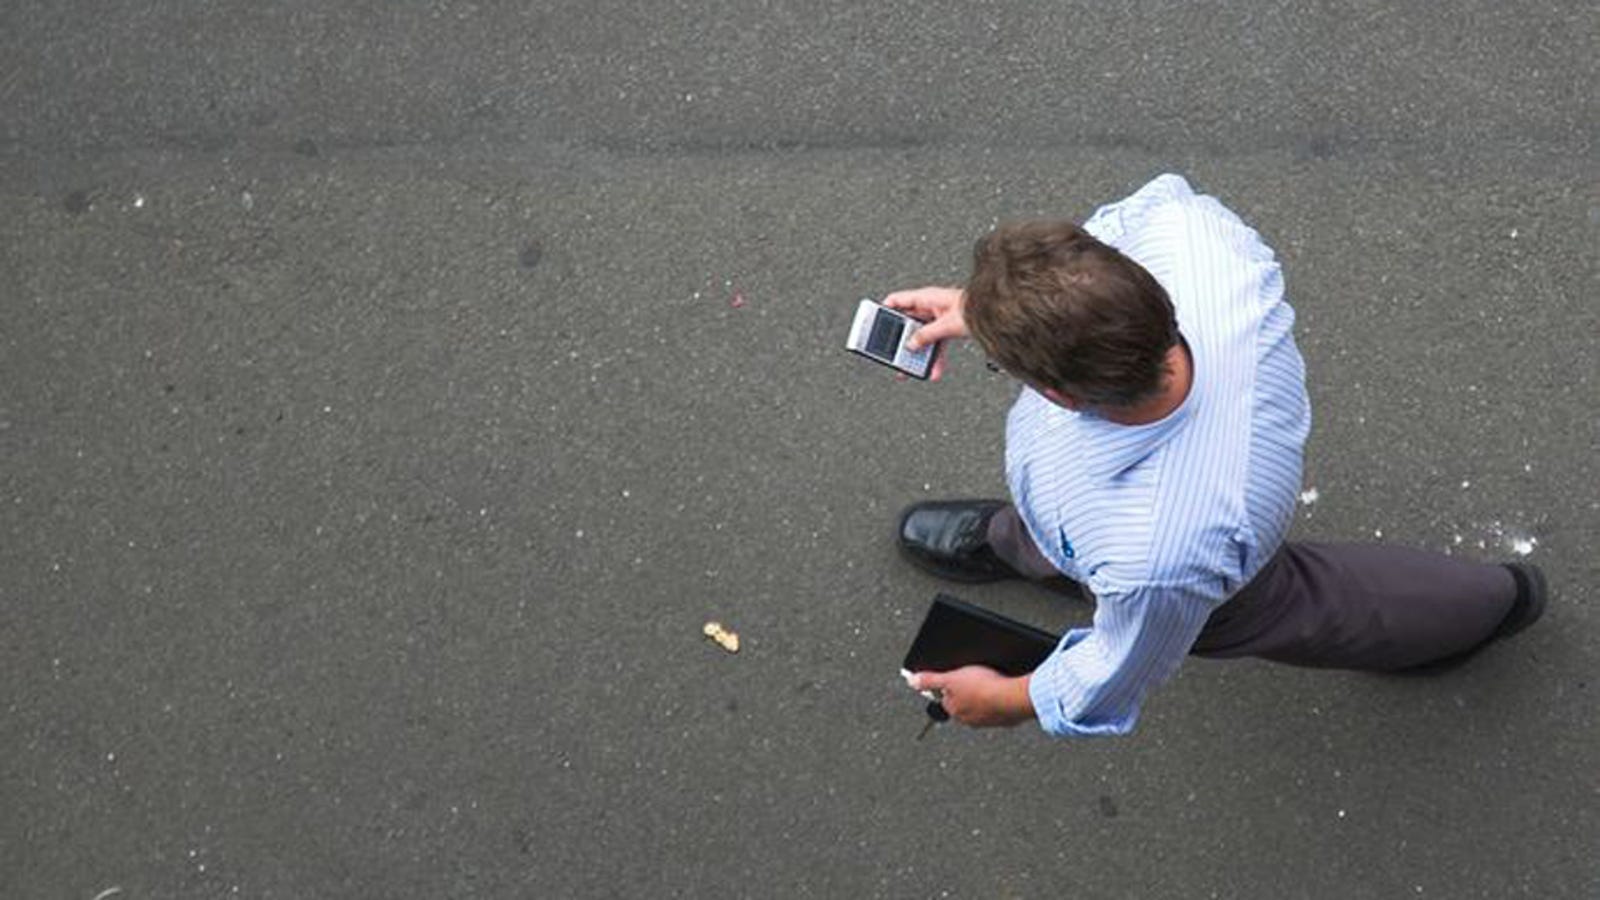 Banning Texting While Walking Might Be a Bit Much